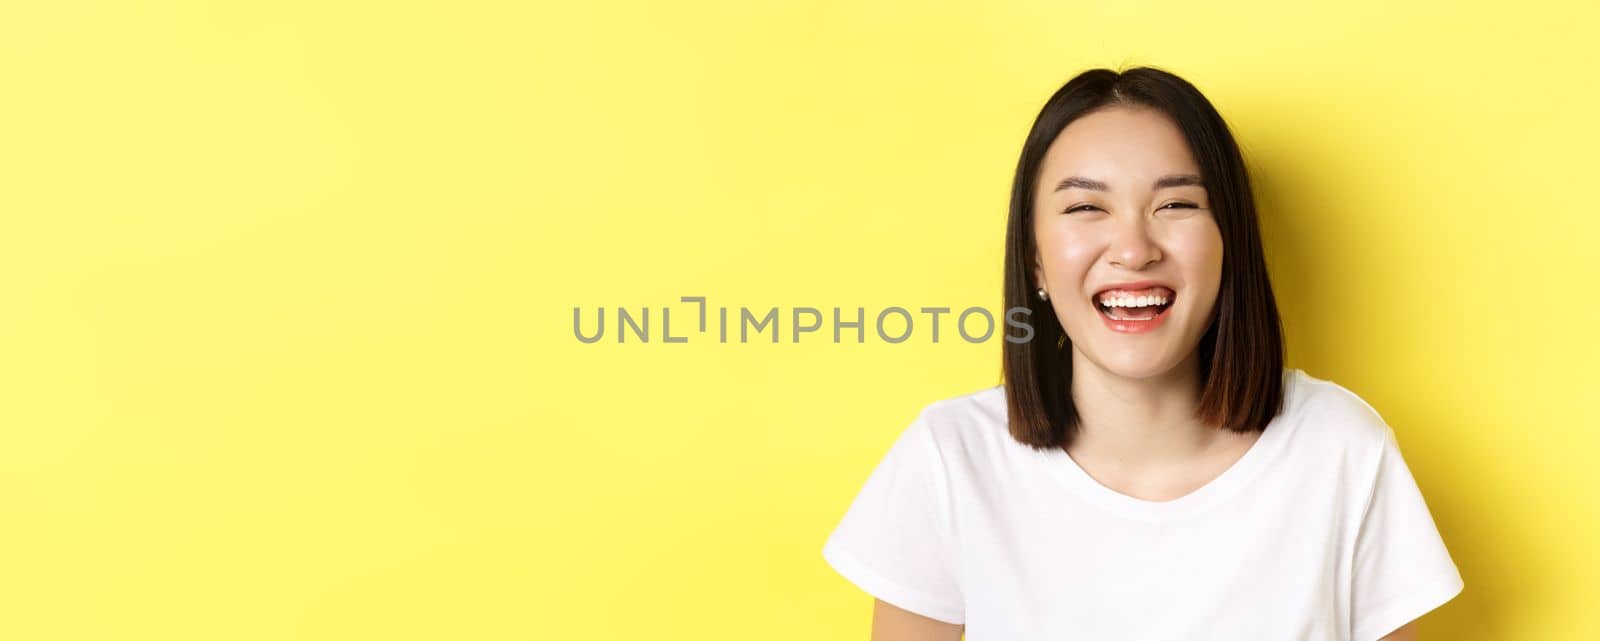 Close up of happy young woman having fun, smiling and laughing carefree, standing in white t-shirt over yellow background.